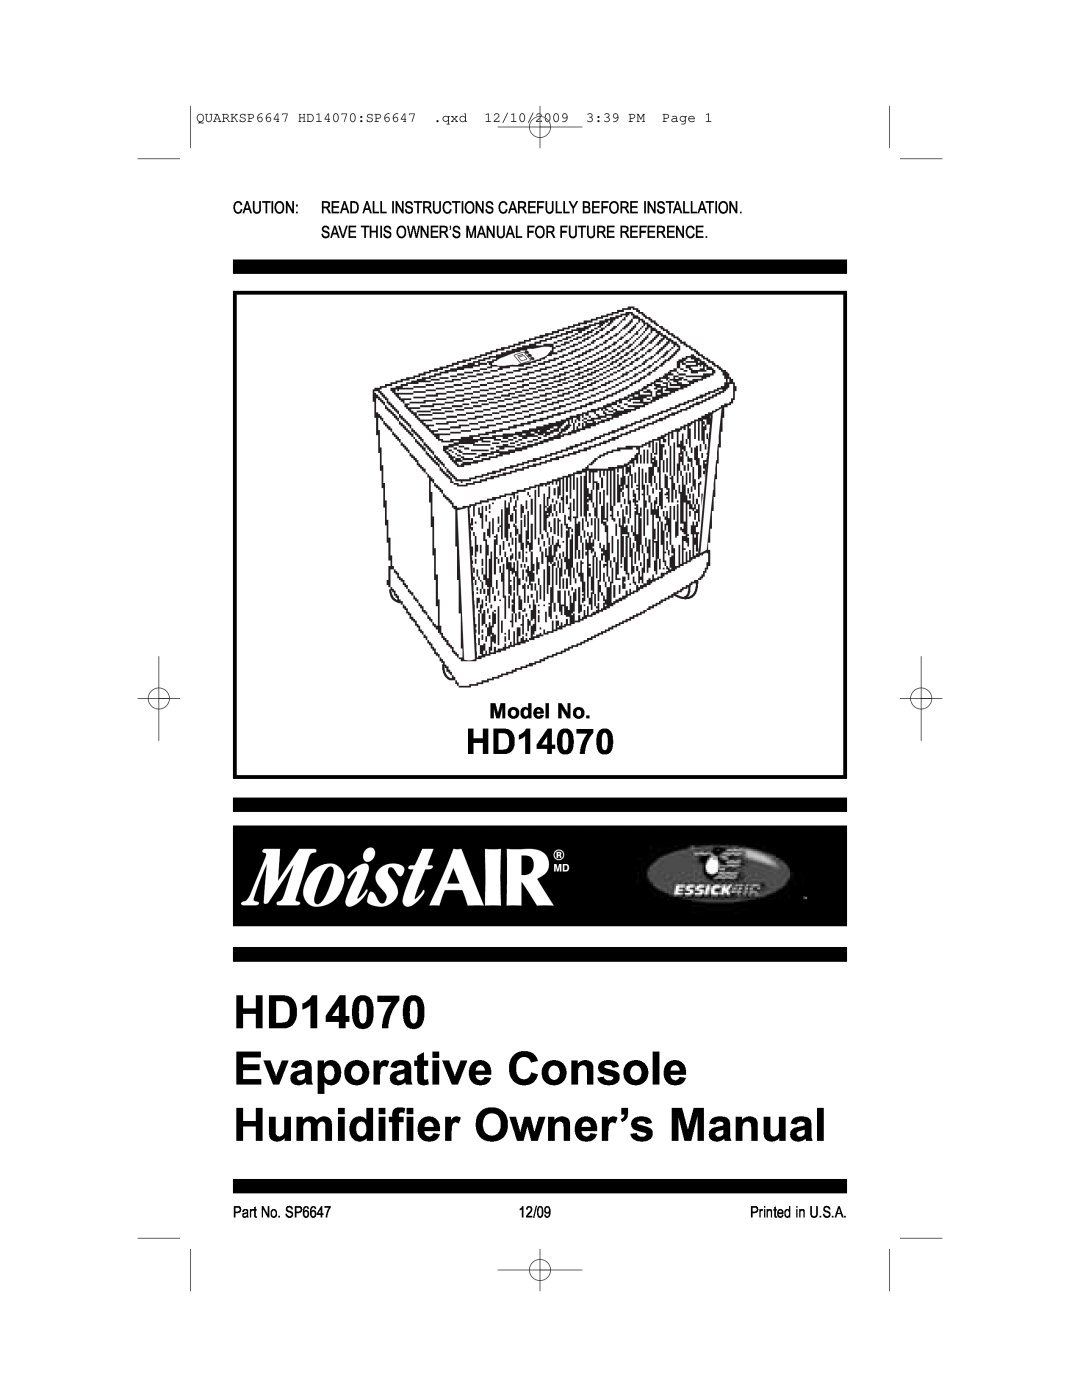 MoistAir owner manual Model No, HD14070 Evaporative Console 